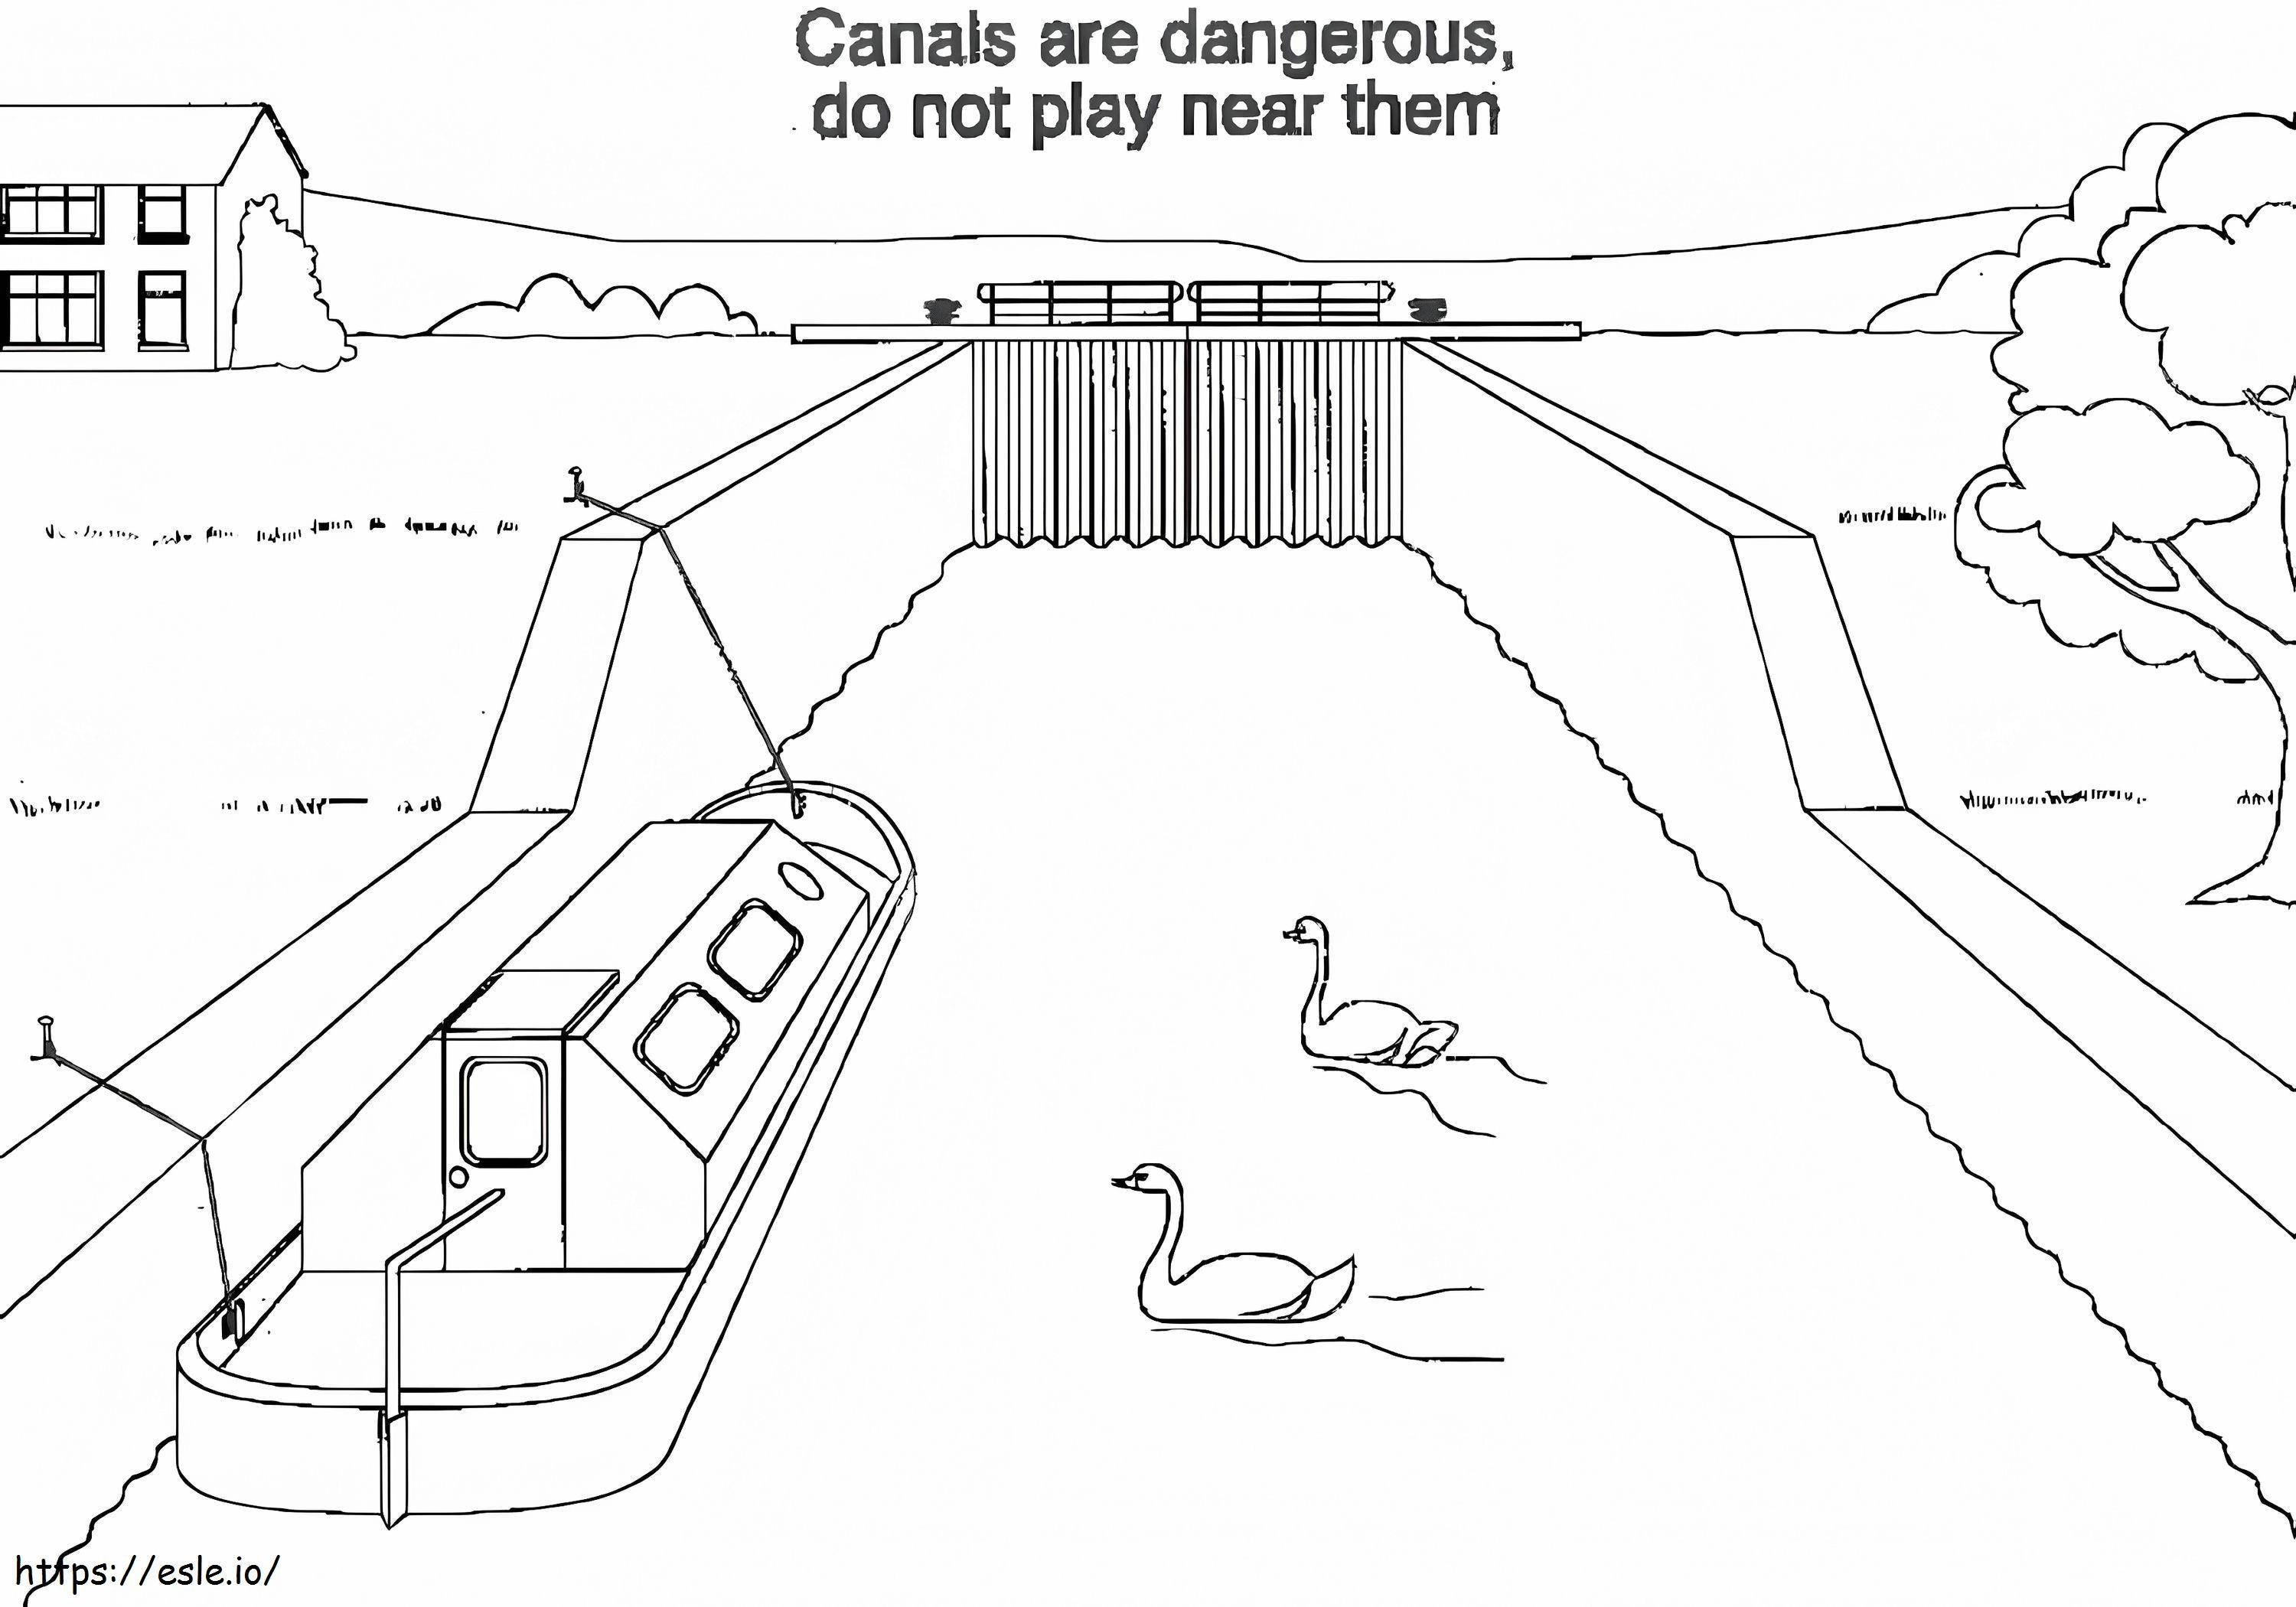 Canals Are Dangerous coloring page